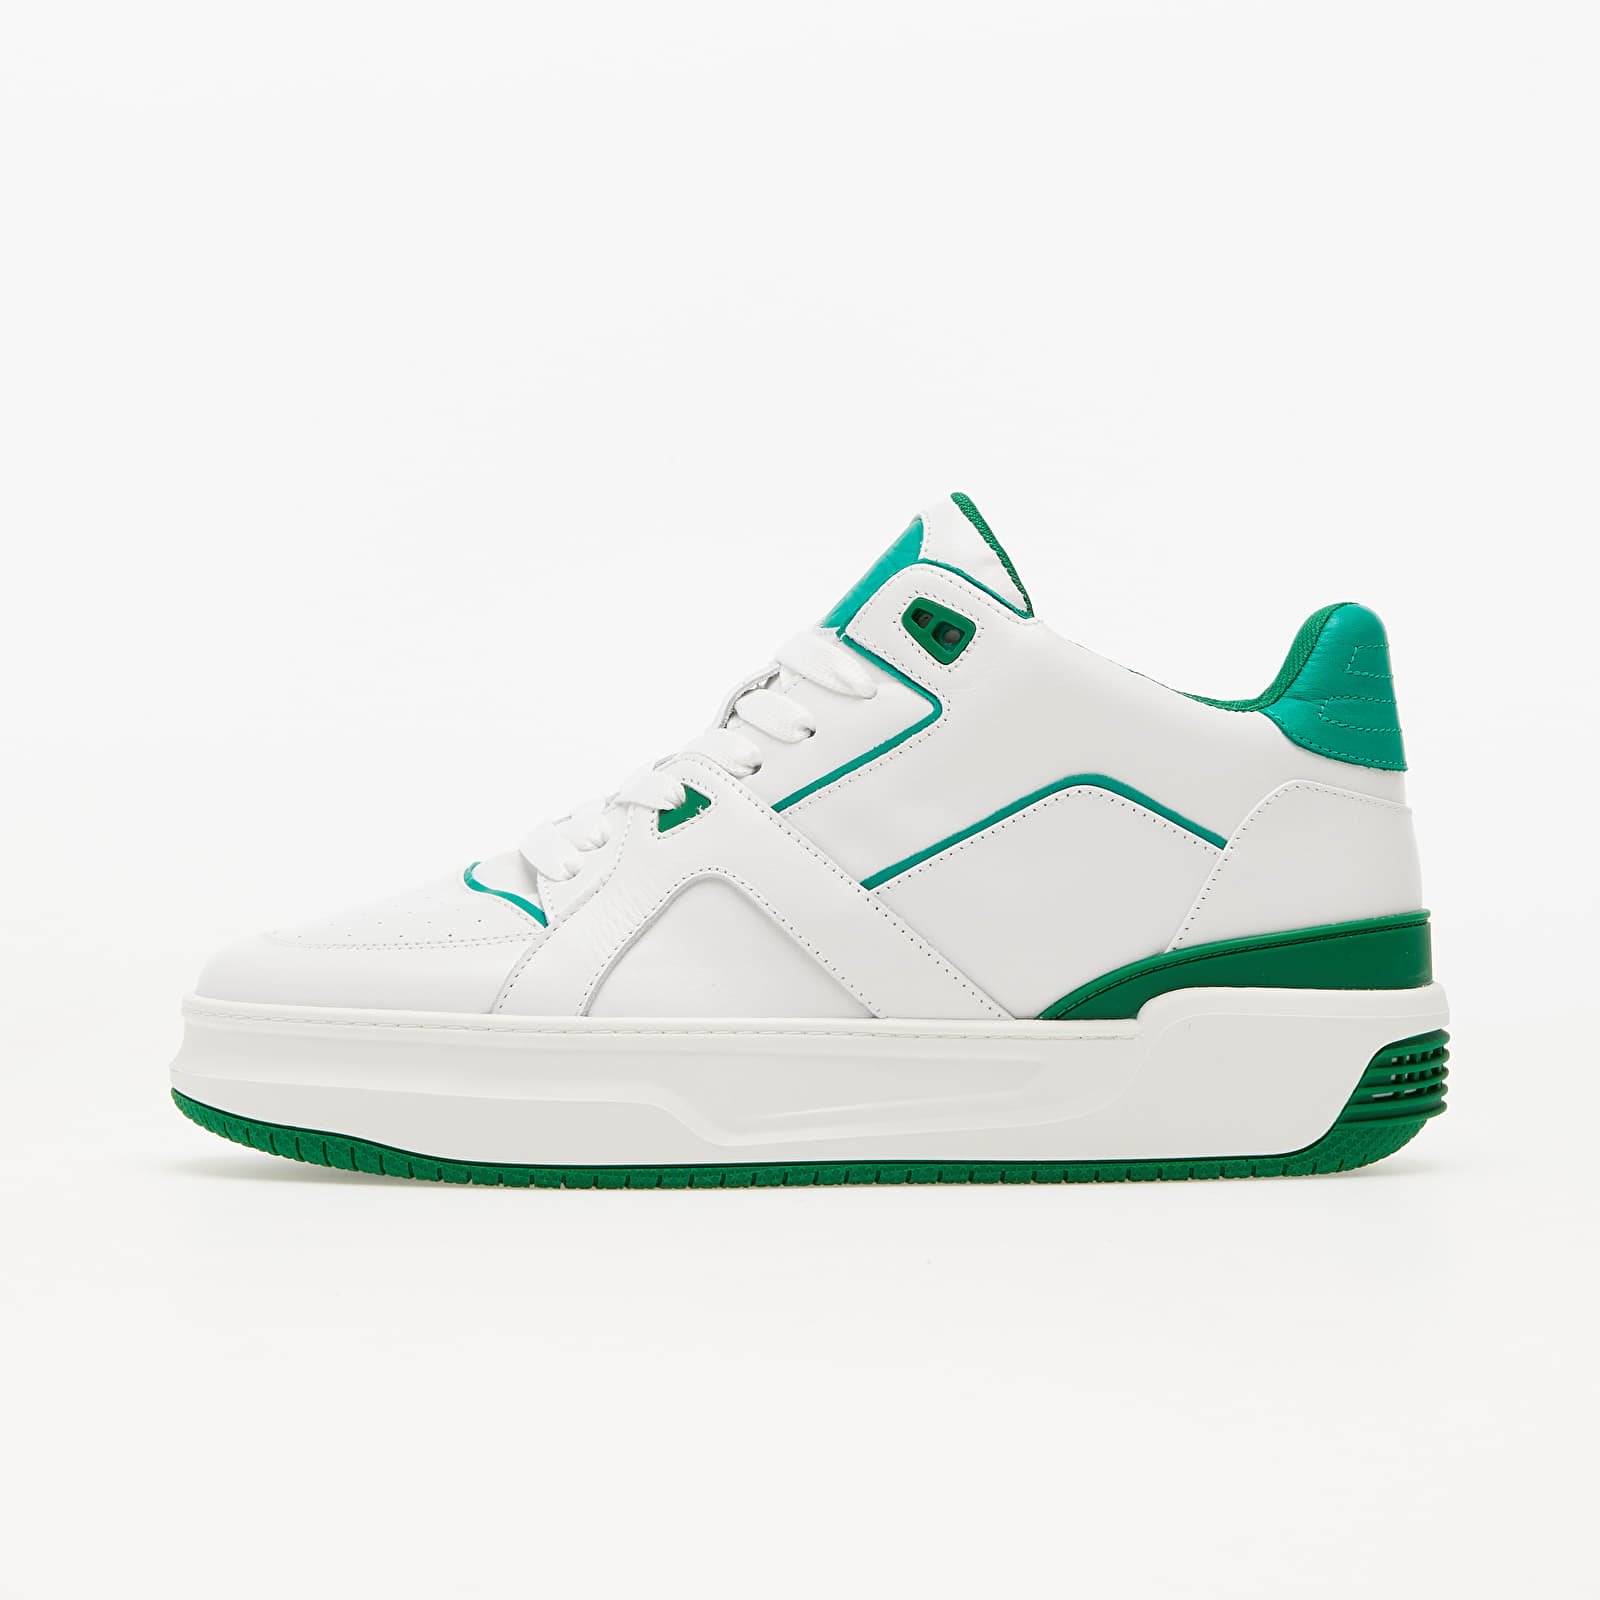 Men's shoes Just Don Courtside Low JD3 White/ Green